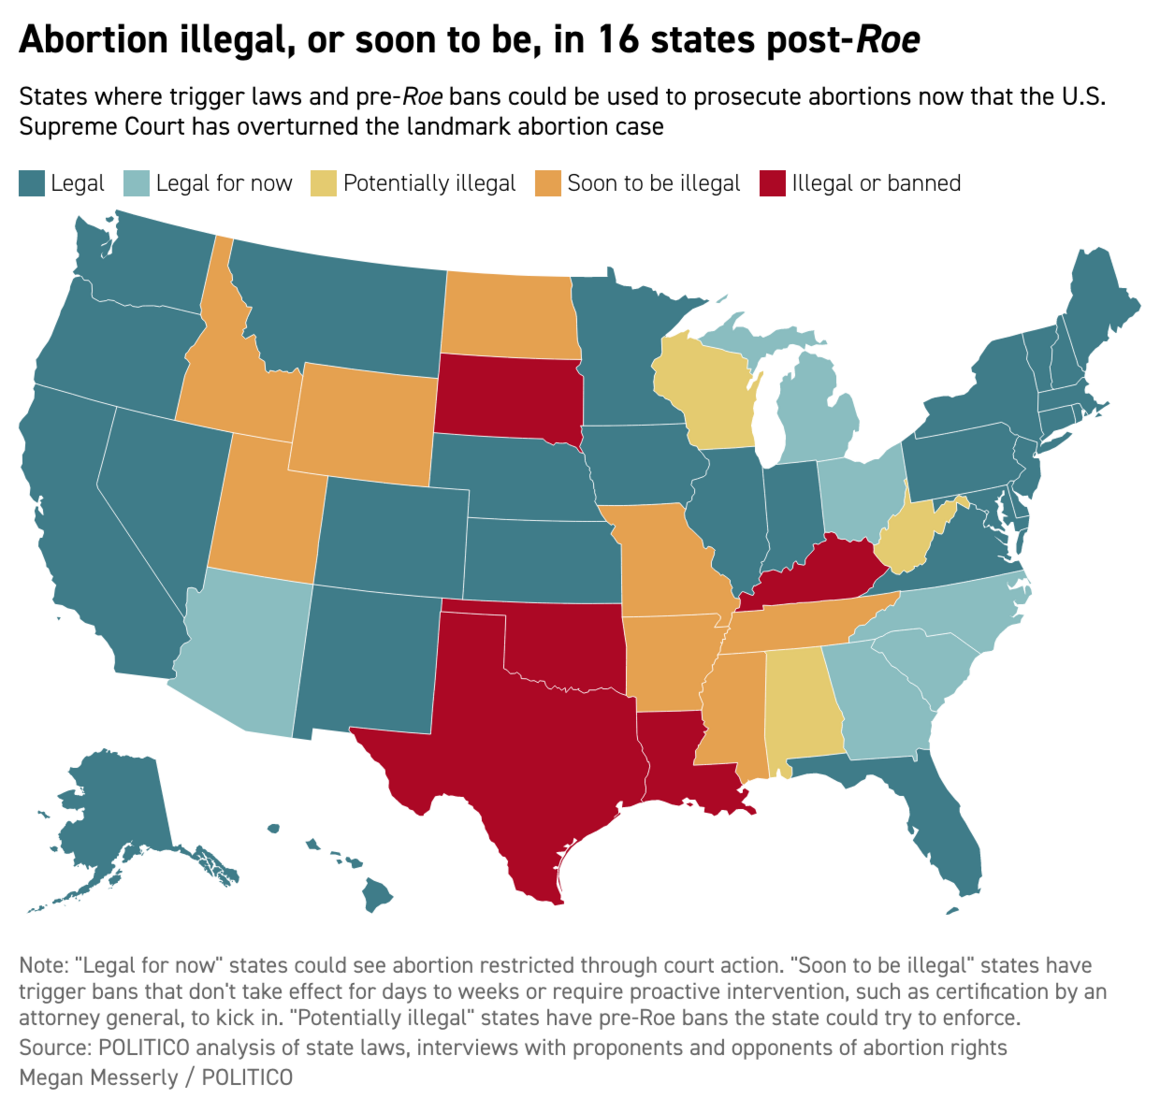 A map of the United States showing where abortion is now illegal, or will be soon, after the fall of Roe.